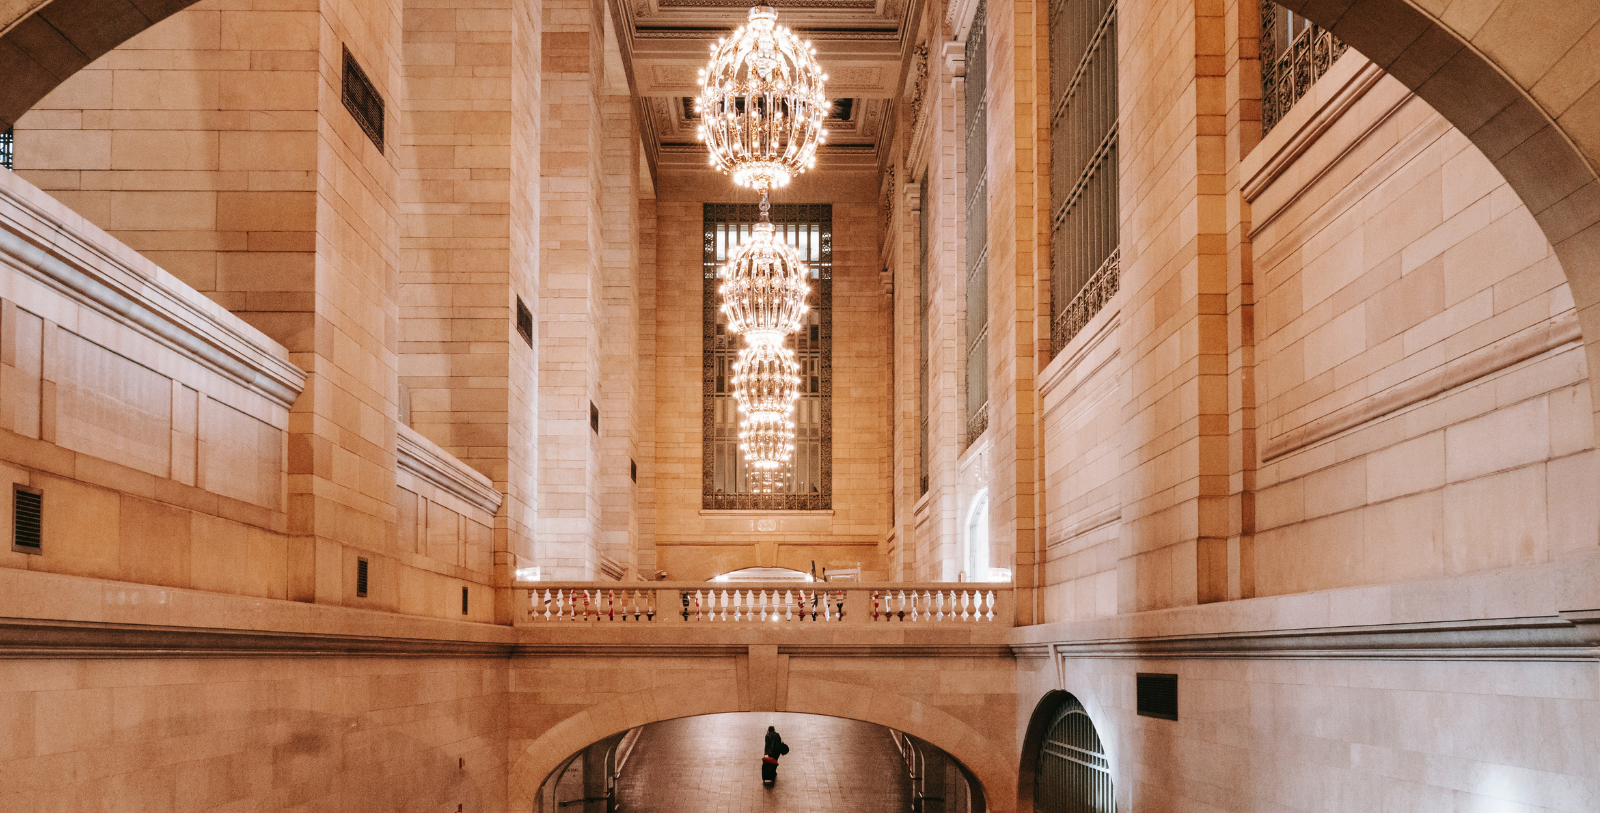 Experience the secrets of New York like the “whispering arches” and “God’s view of the heavens” in Grand Central Terminal.